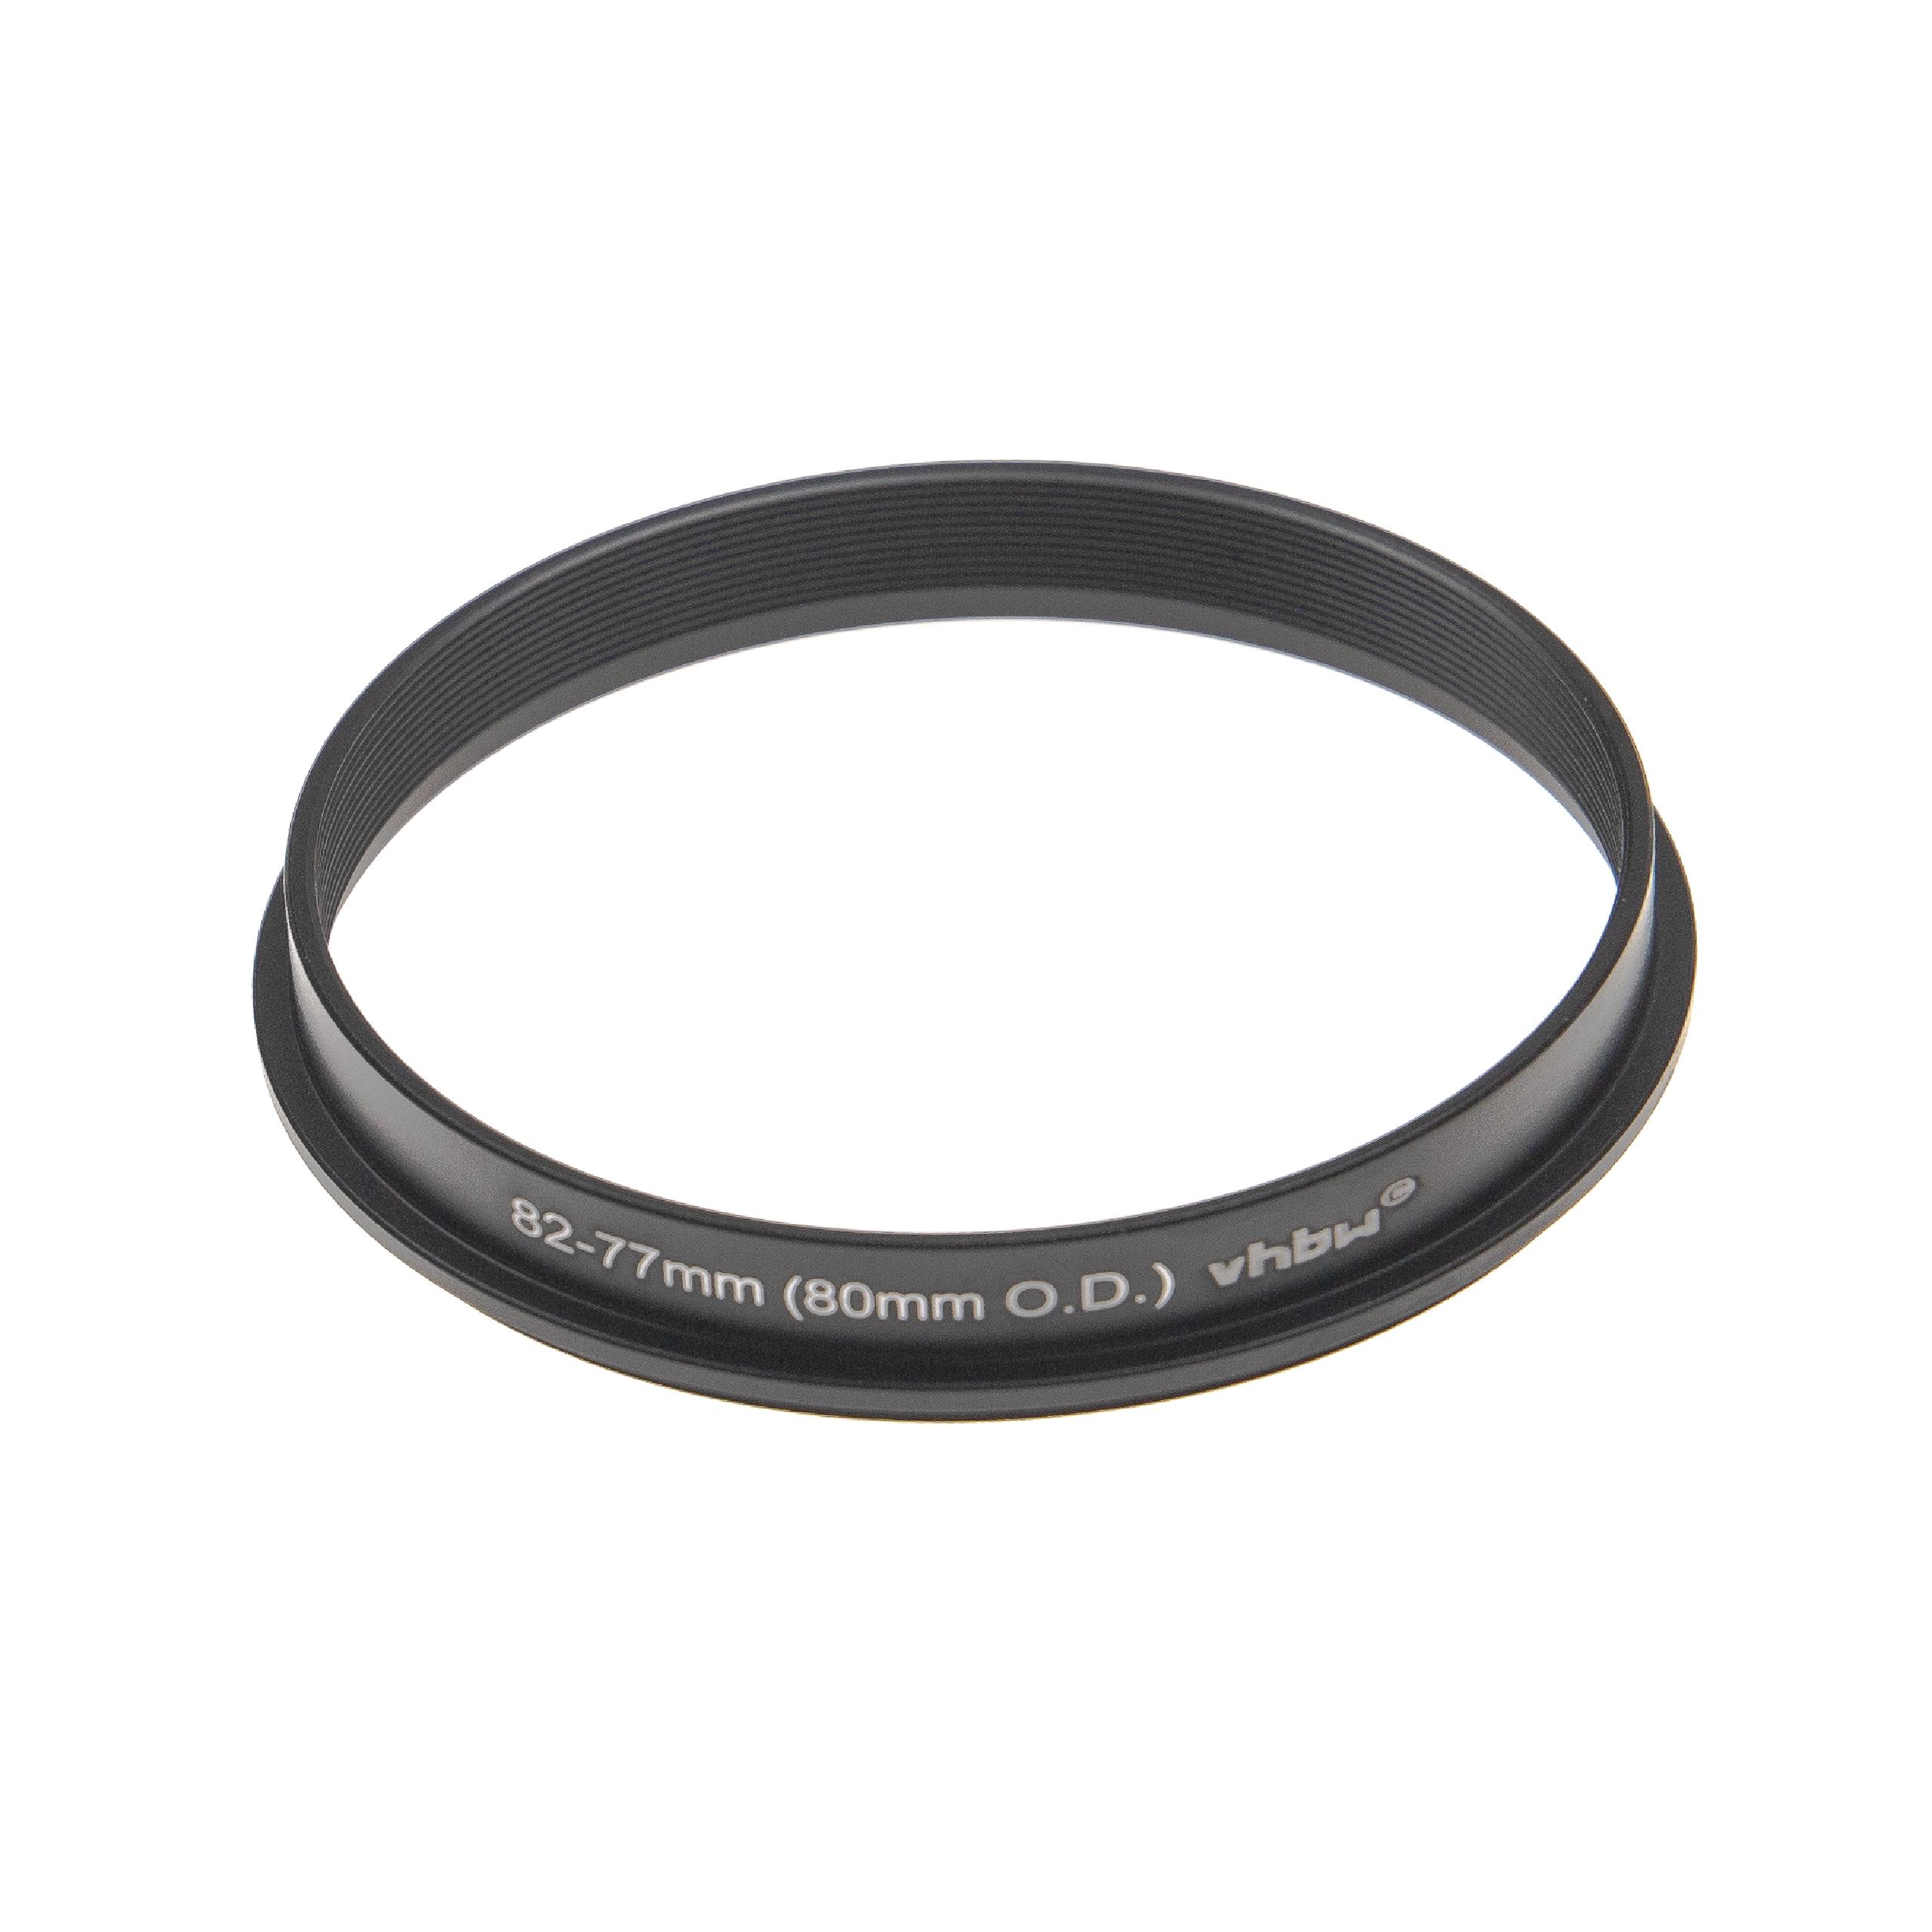 Step-Up Ring Adapter of 82 mm to 77 mm for matte box 80 mm O.D. - Filter Adapter